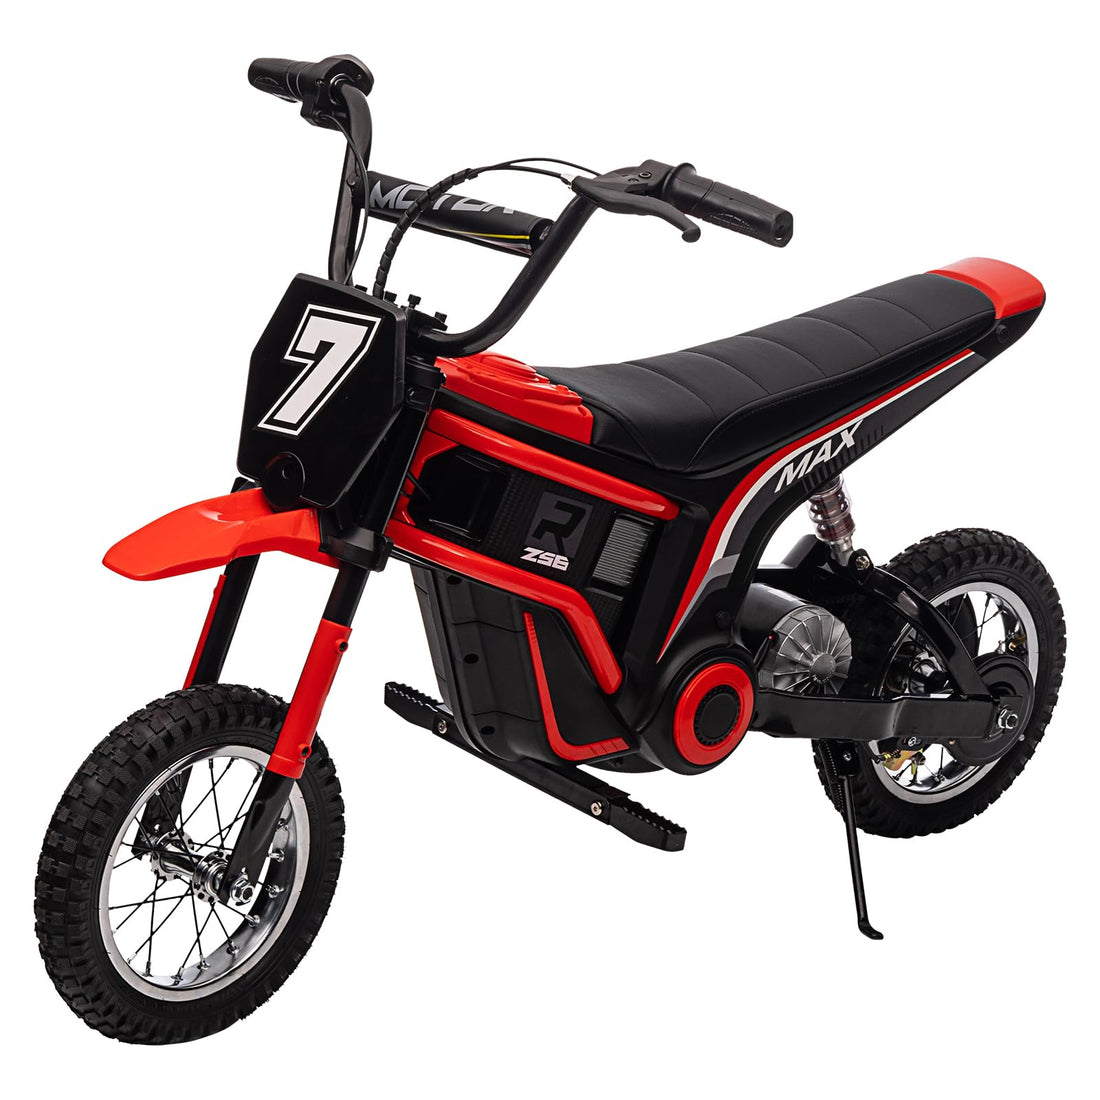 Electric Dirt Bike 350W Electric Motorcycle 3-Speed Modes Motorcycle for Kids Ages 3-10